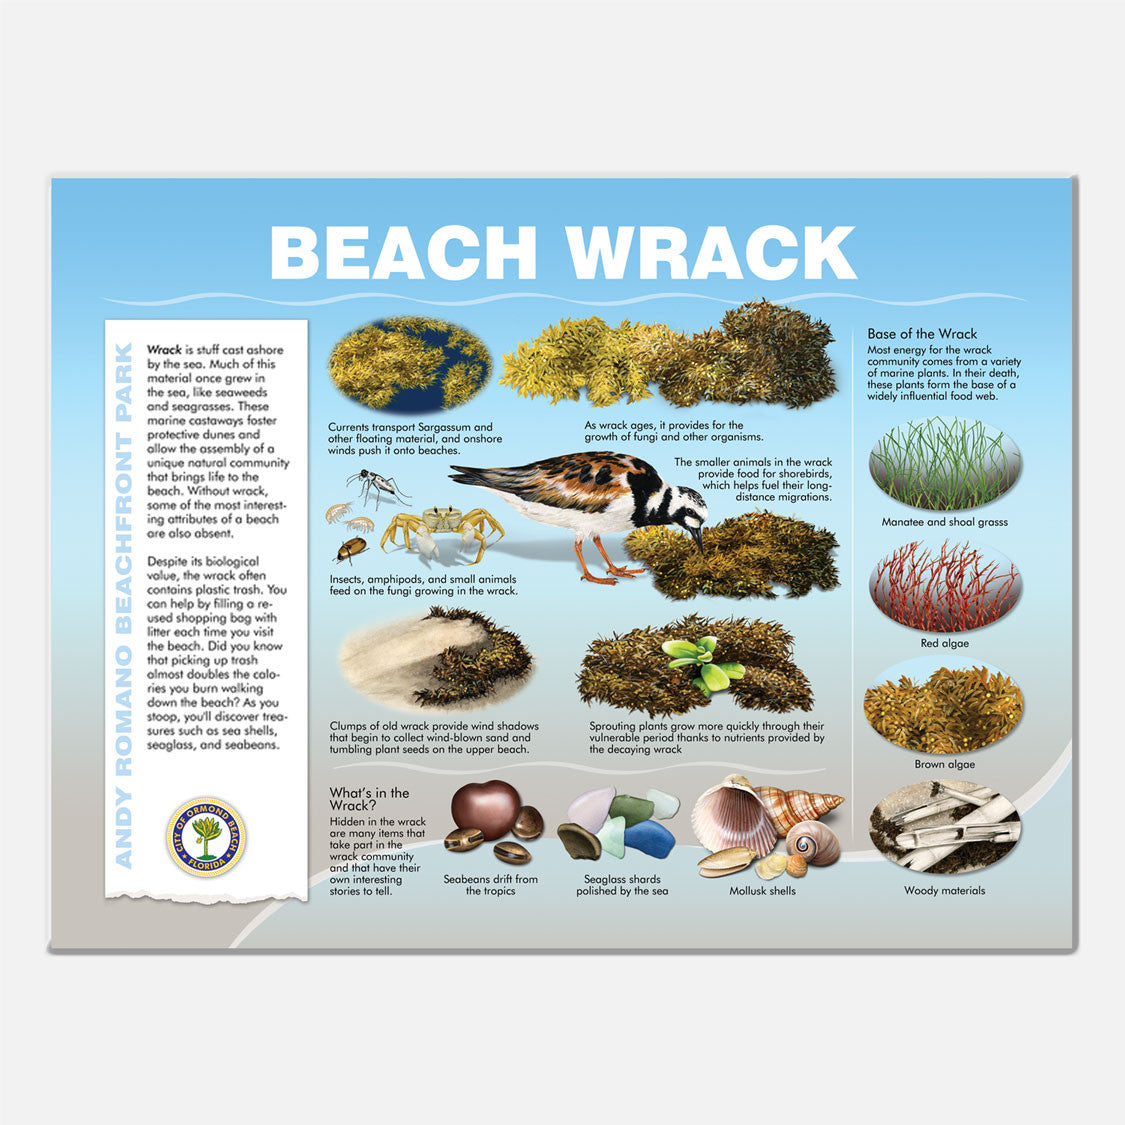 This beautifully illustrated educational display describes the beach wrack at Andy Romano Beachfront Park, Ormond Beach, Florida.